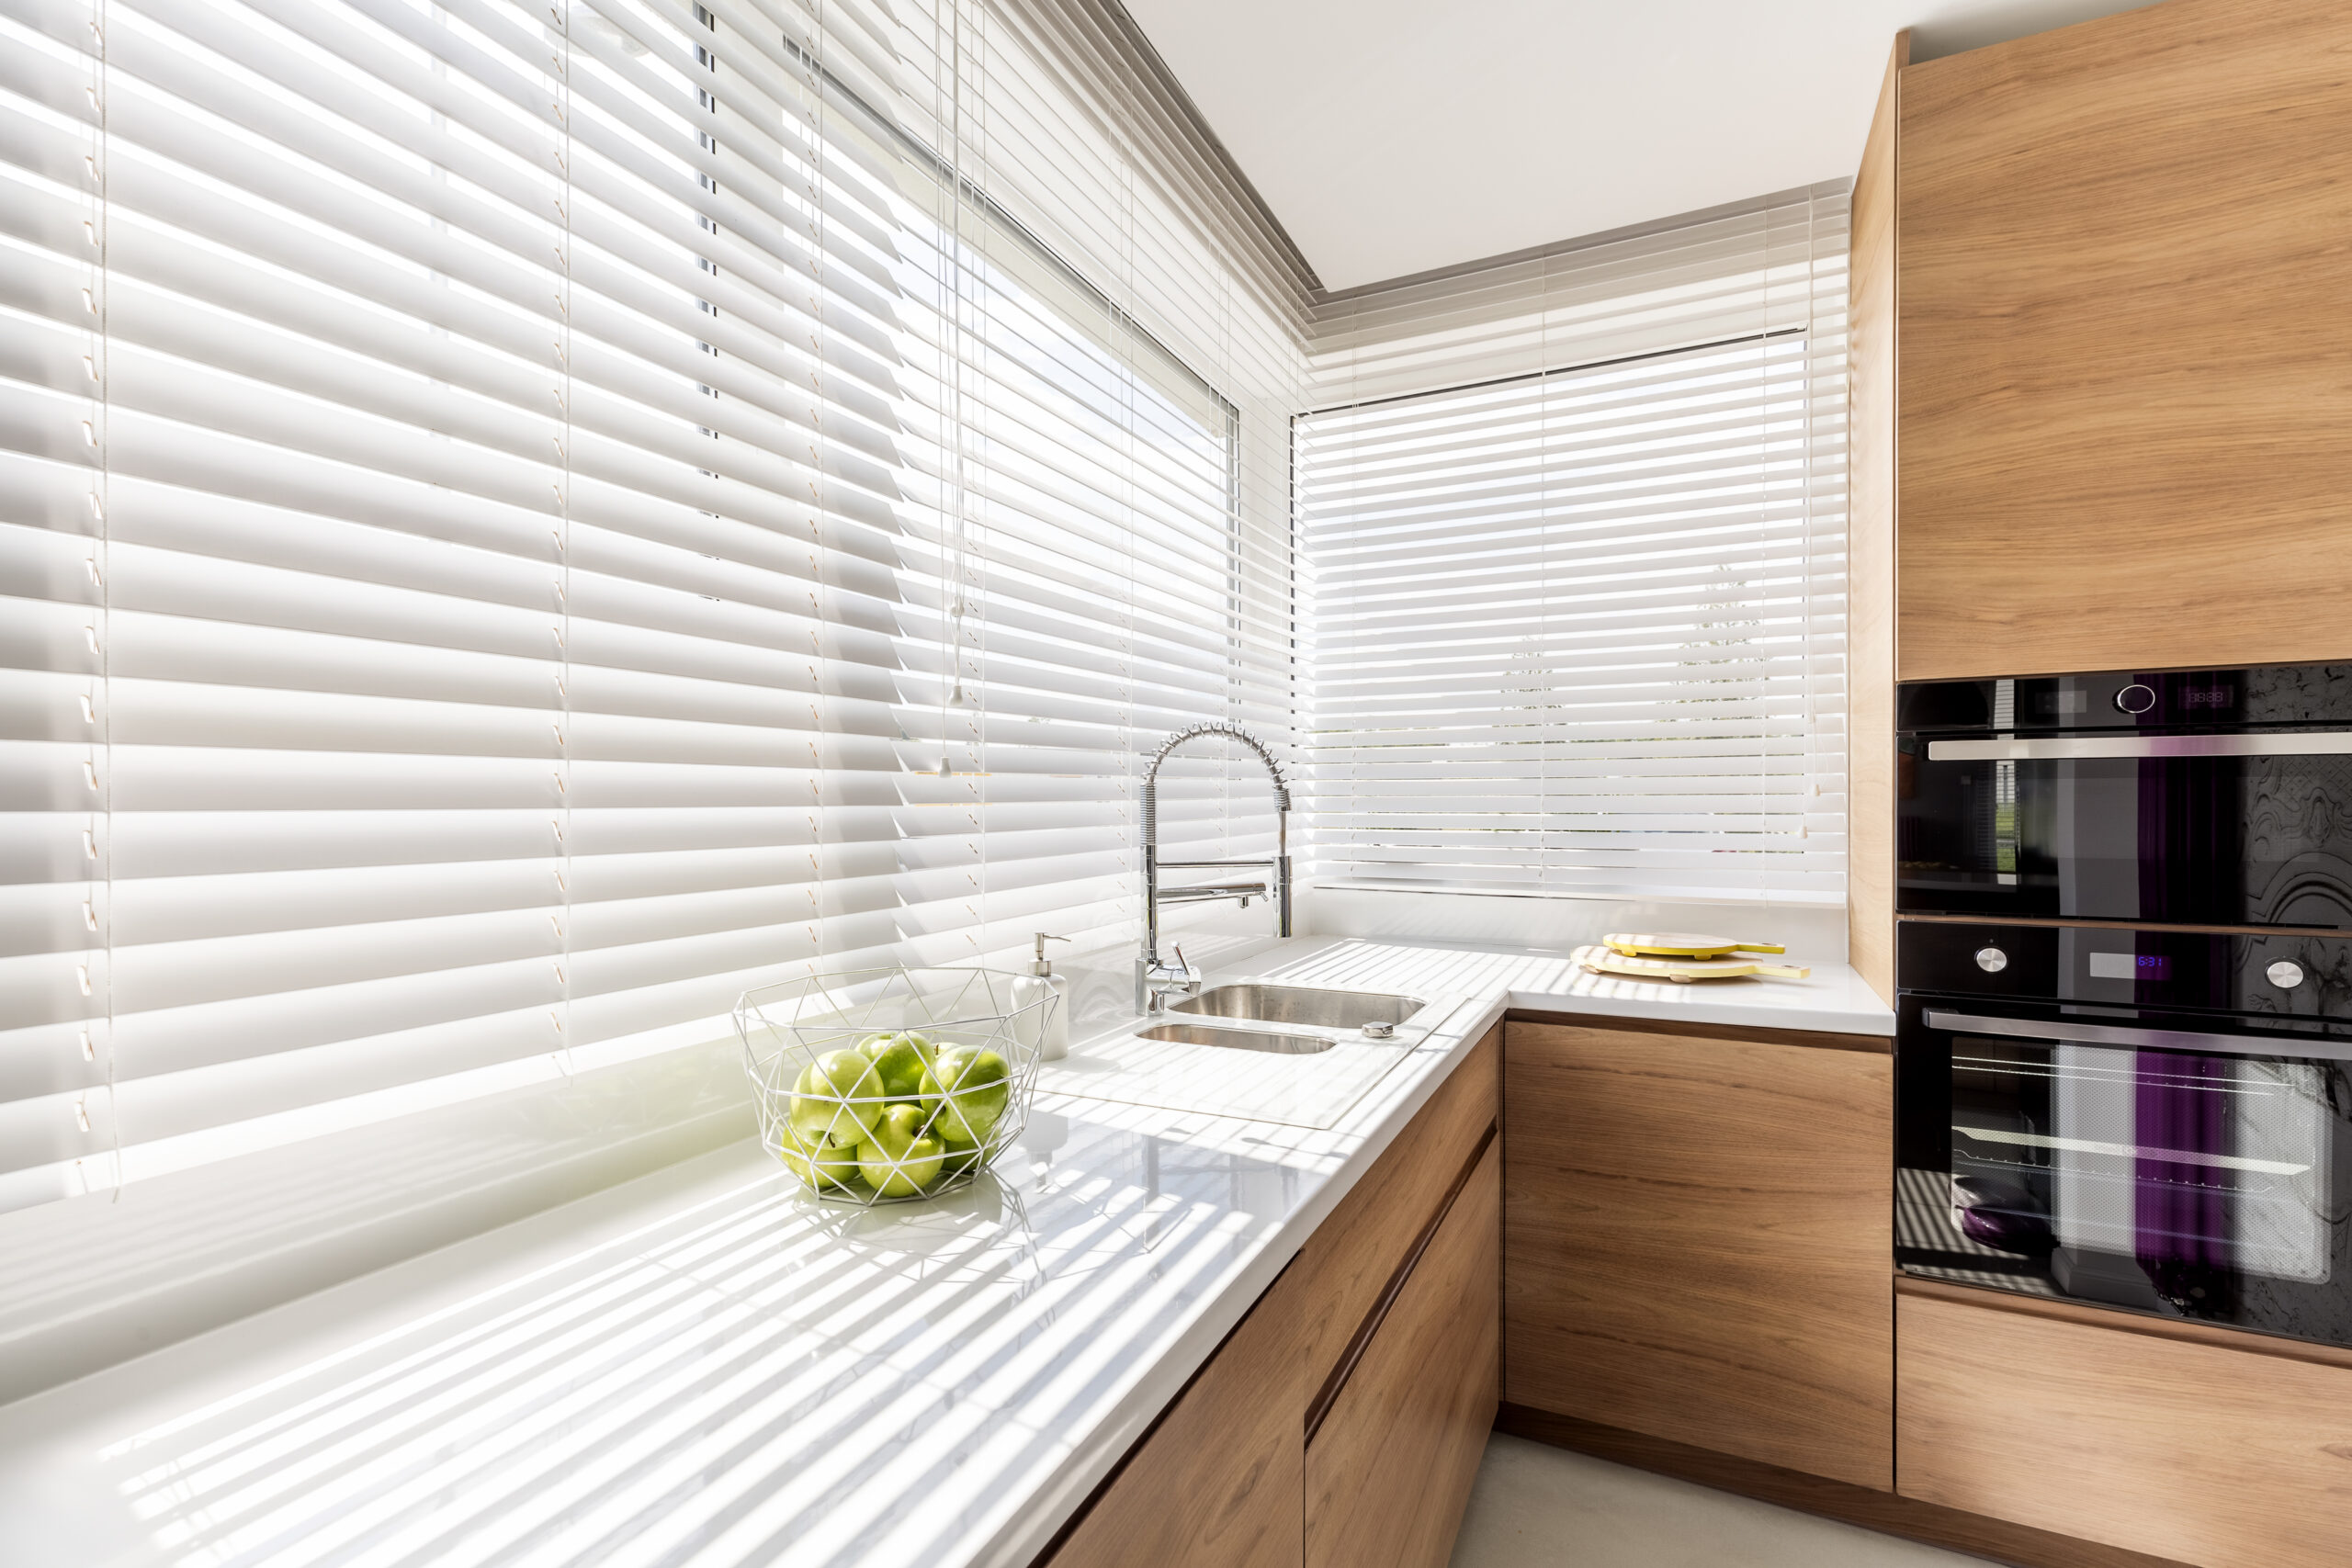 6 Reasons Why You Should Use Blinds For Your Kitchen Windows